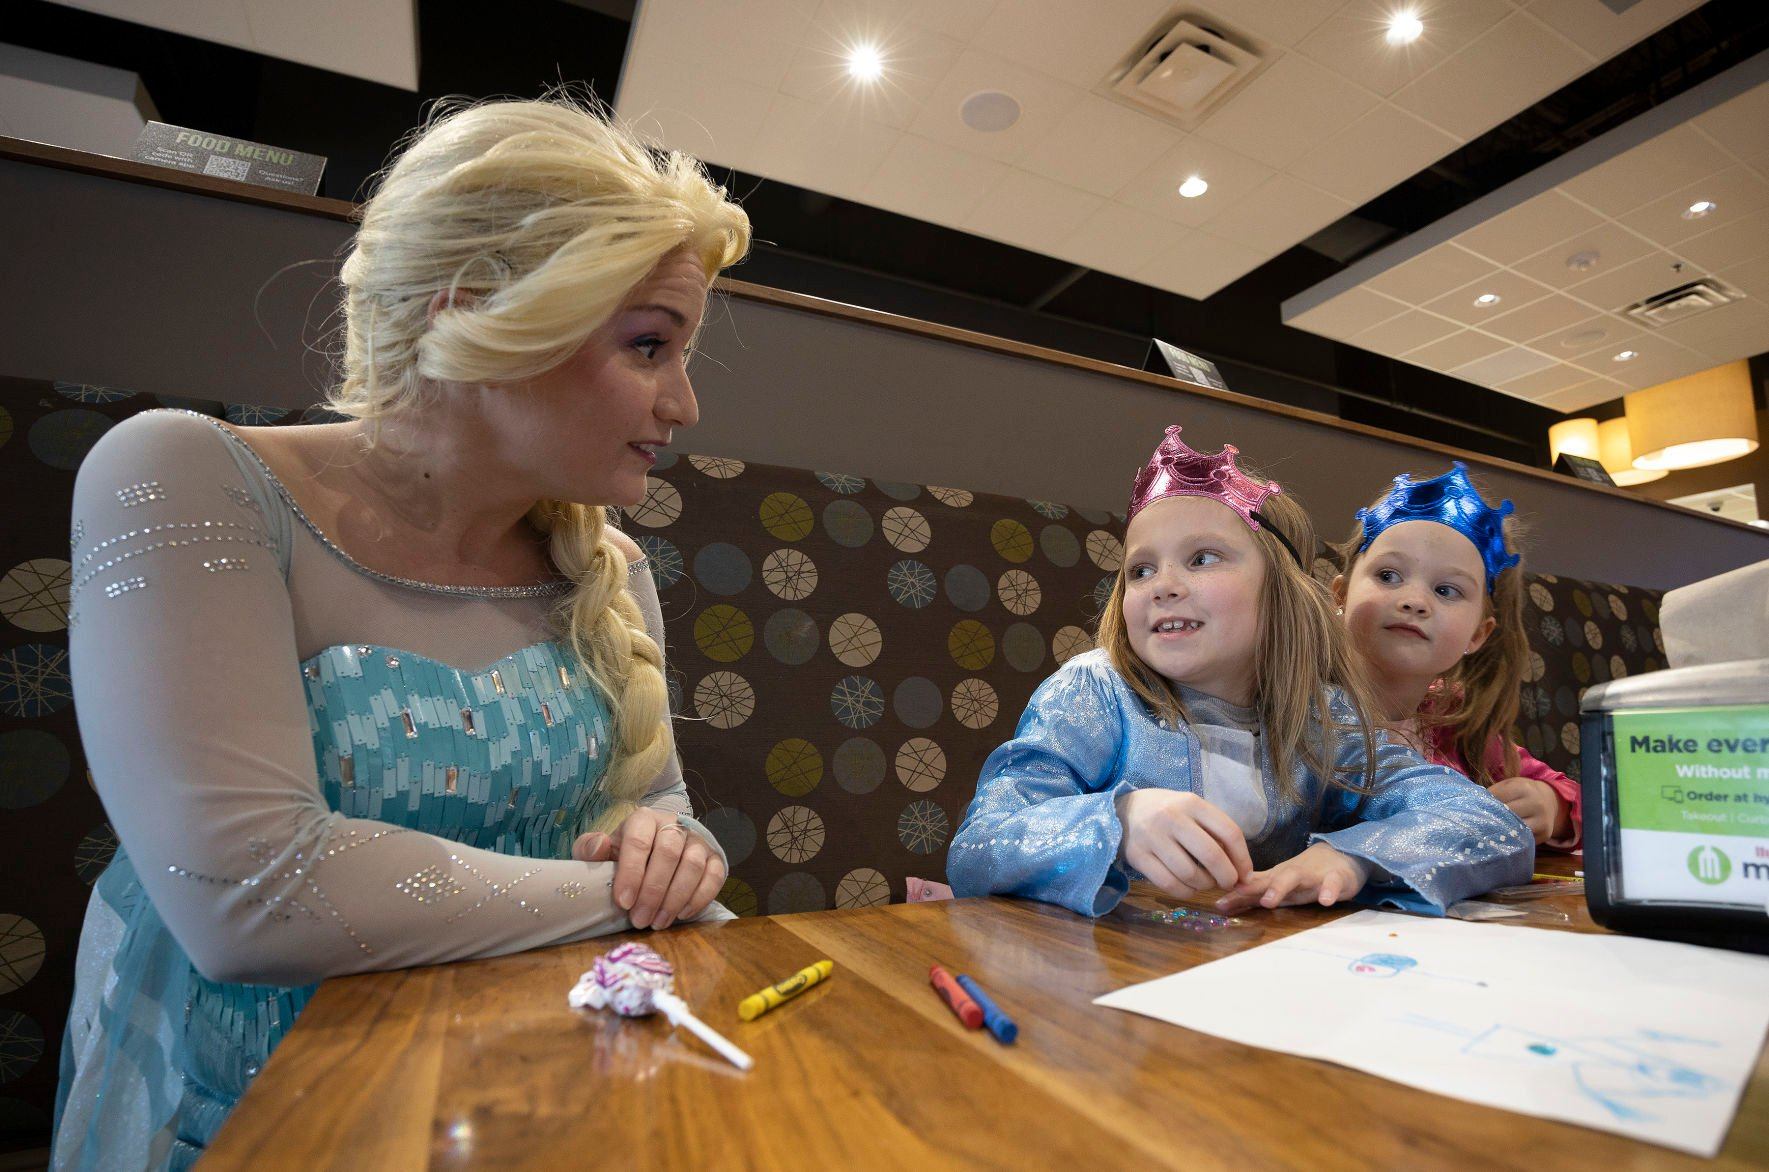 Traci Yeo, as Elsa, and owner of Royal T Princesses and Superheroes, greets Skylar, 7, (center) and Charlie Kearney, 4, at Wahlburgers in Hy-Vee on South Locust Street in Dubuque on Friday.    PHOTO CREDIT: Stephen Gassman